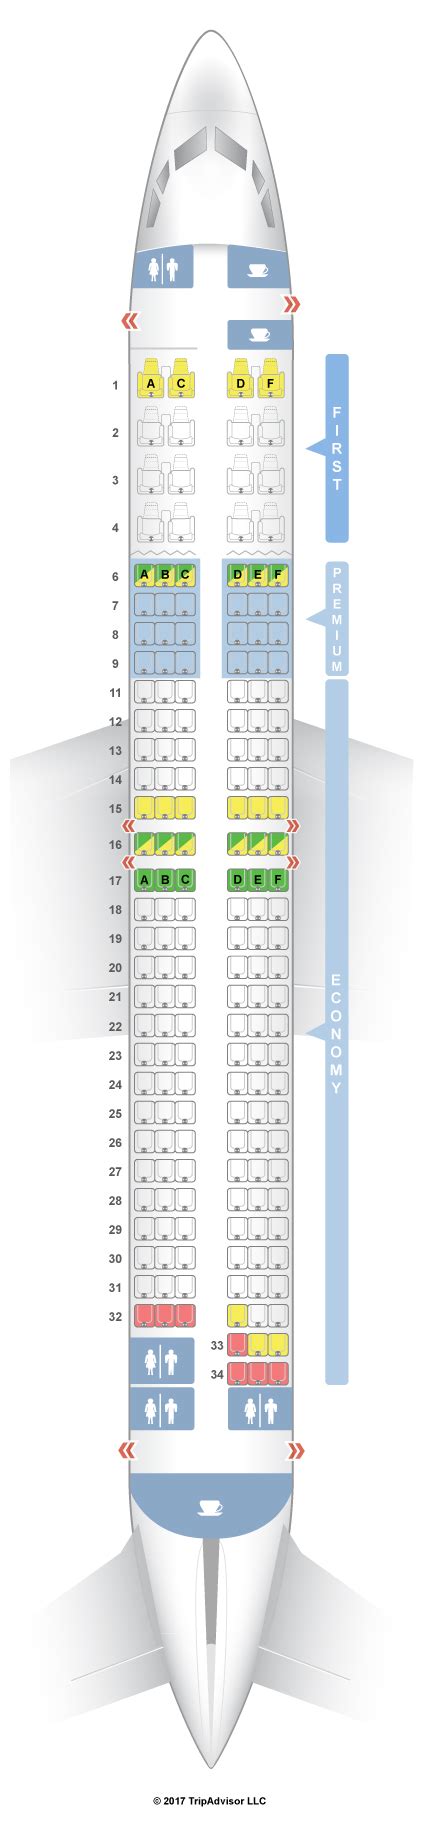 All economy seats on Qantas 737-800 are a disgrace. 30" pitch is horrific. Avoid this aircraft in economy if at all possible. Submitted by SeatGuru User on 2019/09/10 for Seat 9A. Seat 9 is worse than a bad seat. A flat wall replaces a window without the space of even a window surround or sill.. 